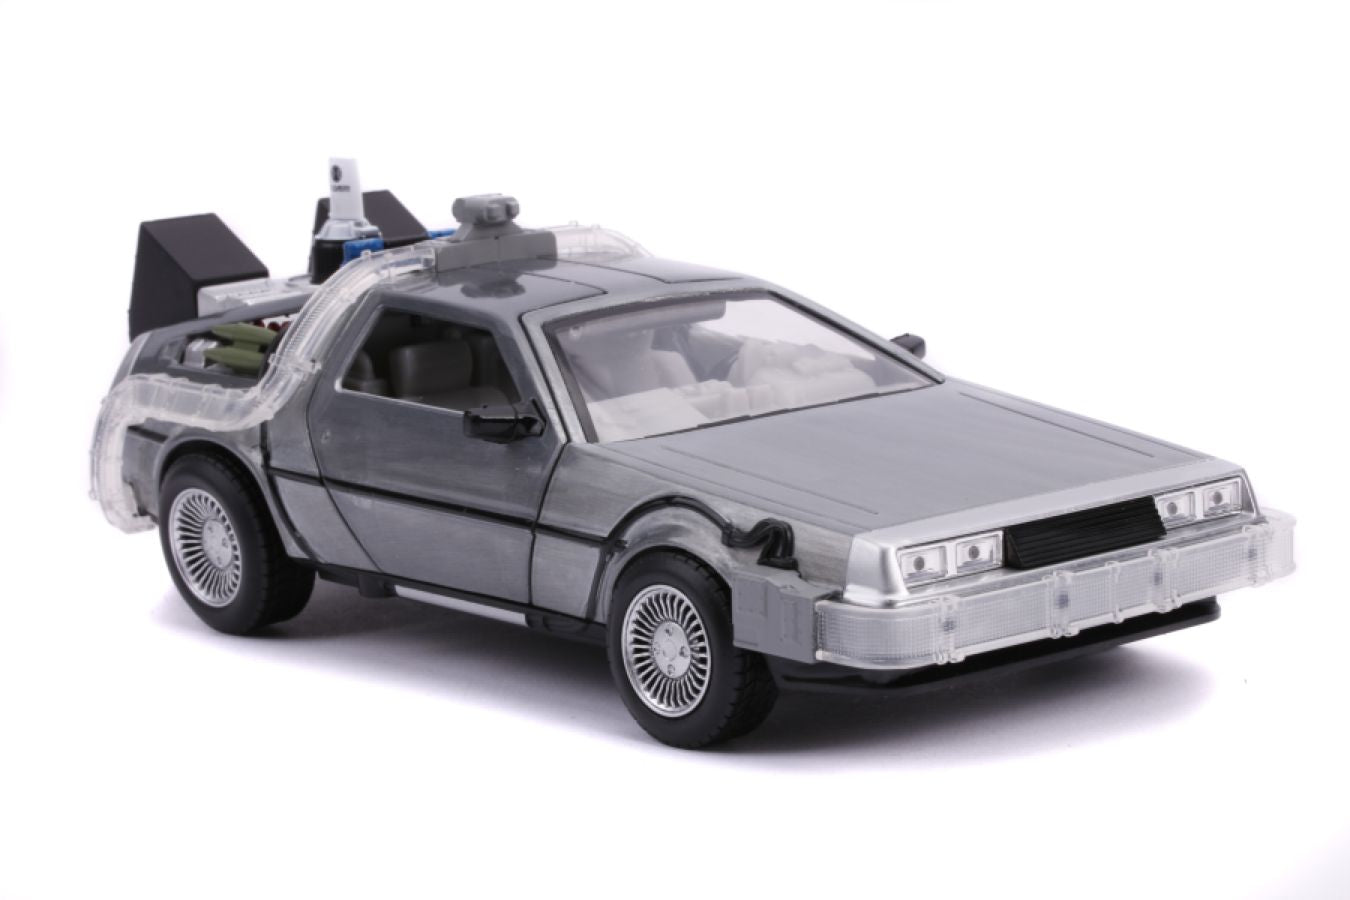 Back to the Future Part II - Delorean 1:24 Scale Hollywood Ride